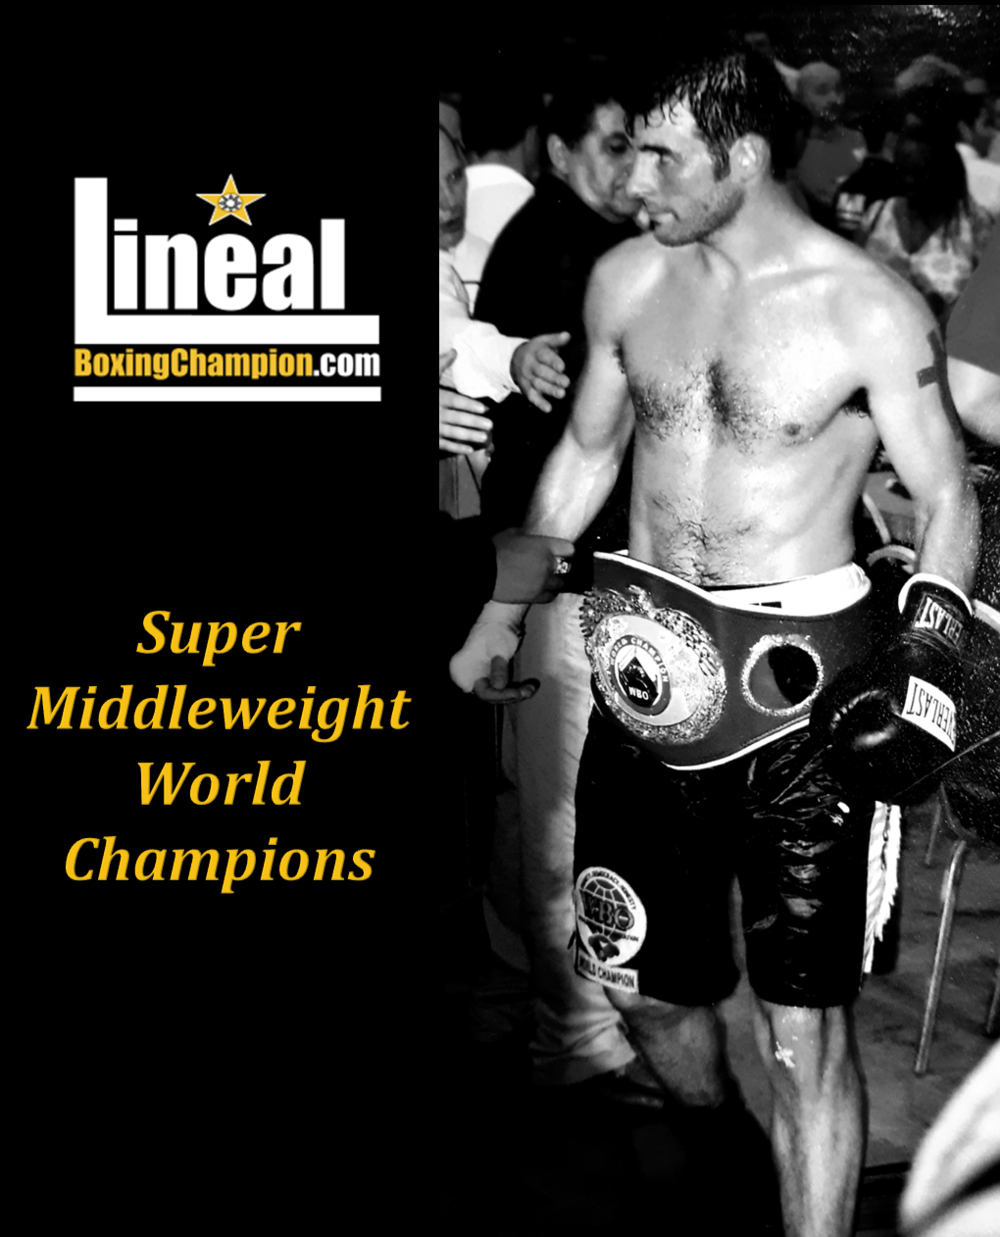 LinealBoxingChampion.com: The Record Keeper of Boxing's Title